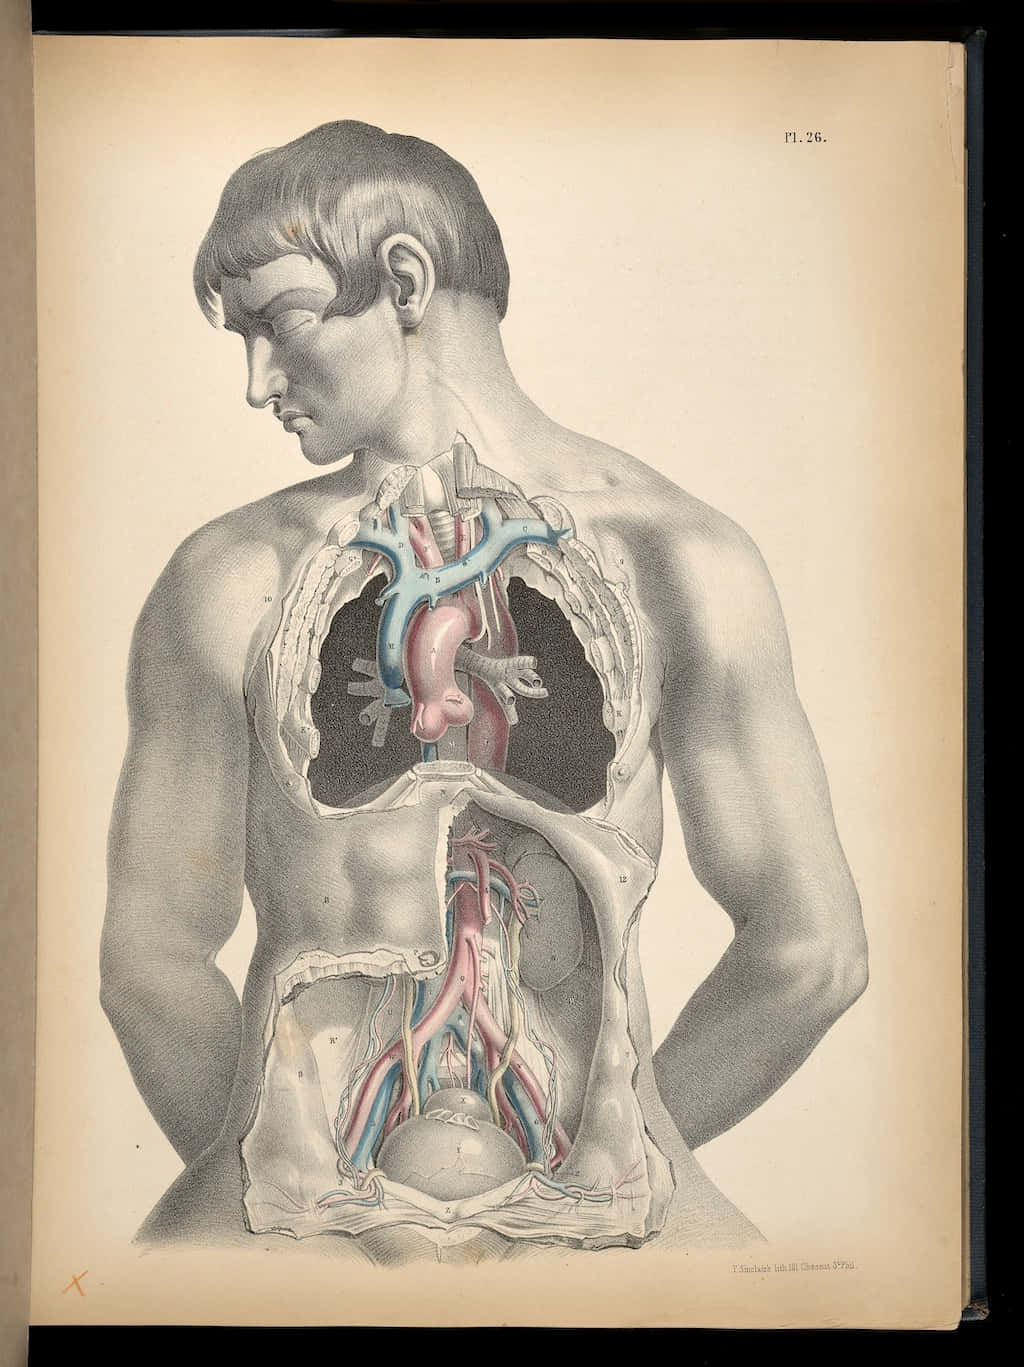 A Medical Illustration Of A Man's Chest